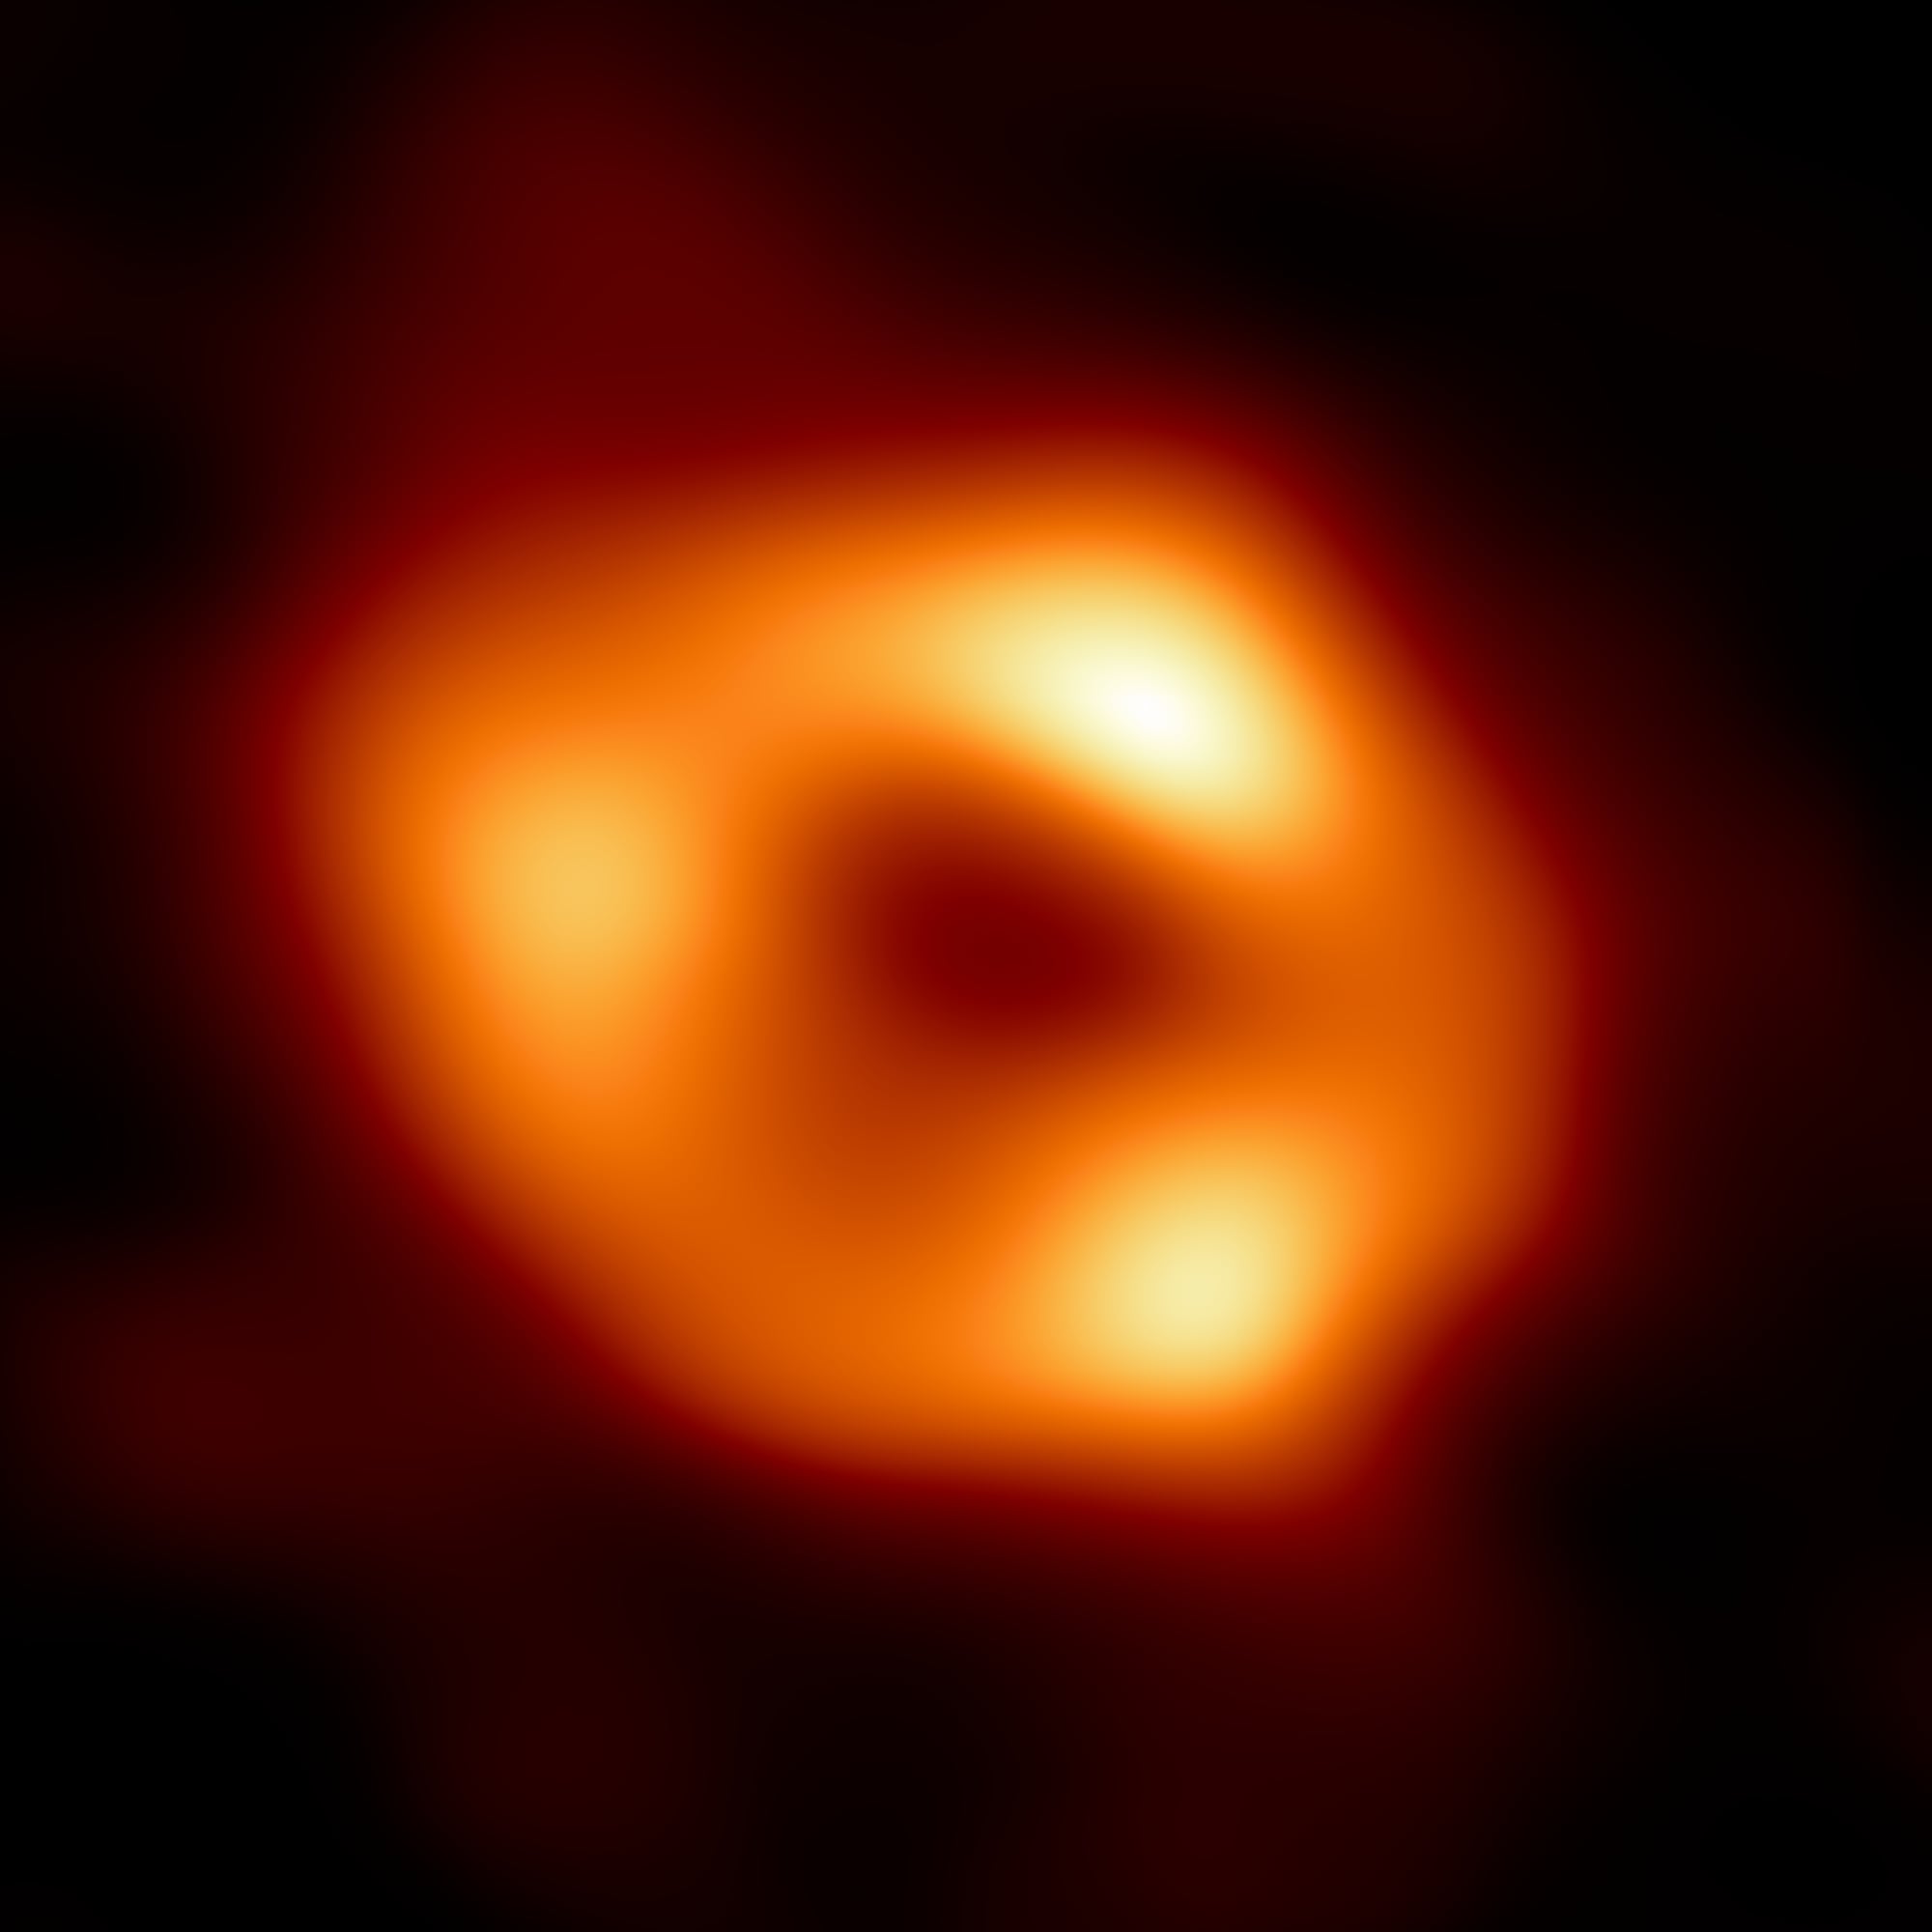 Bubble of gas zips around galaxy's supermassive black hole